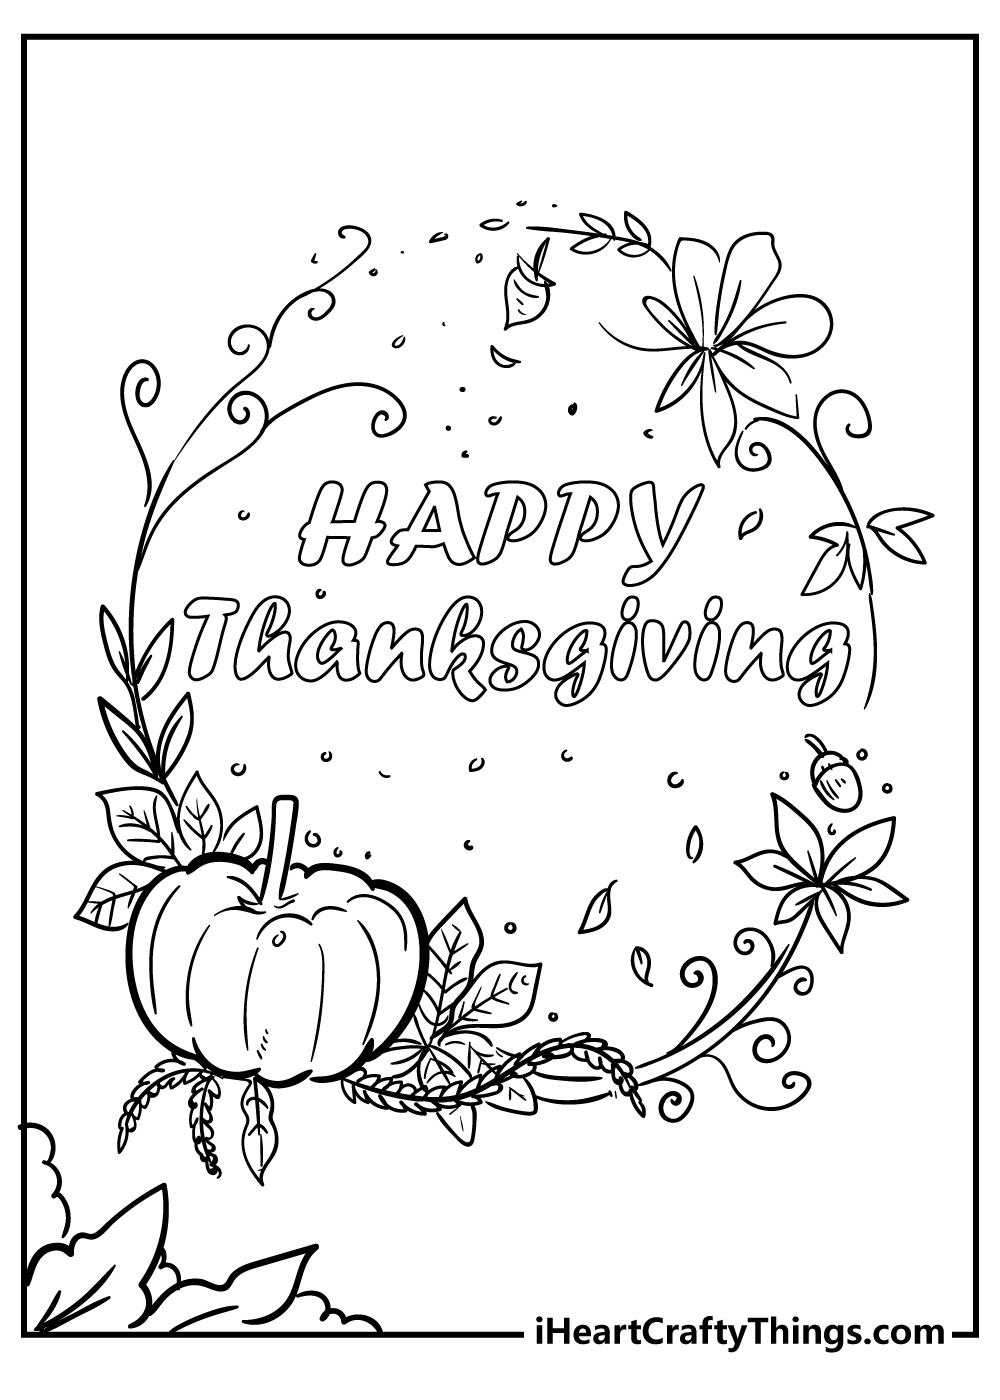 Thanksgiving present coloring pages free printables